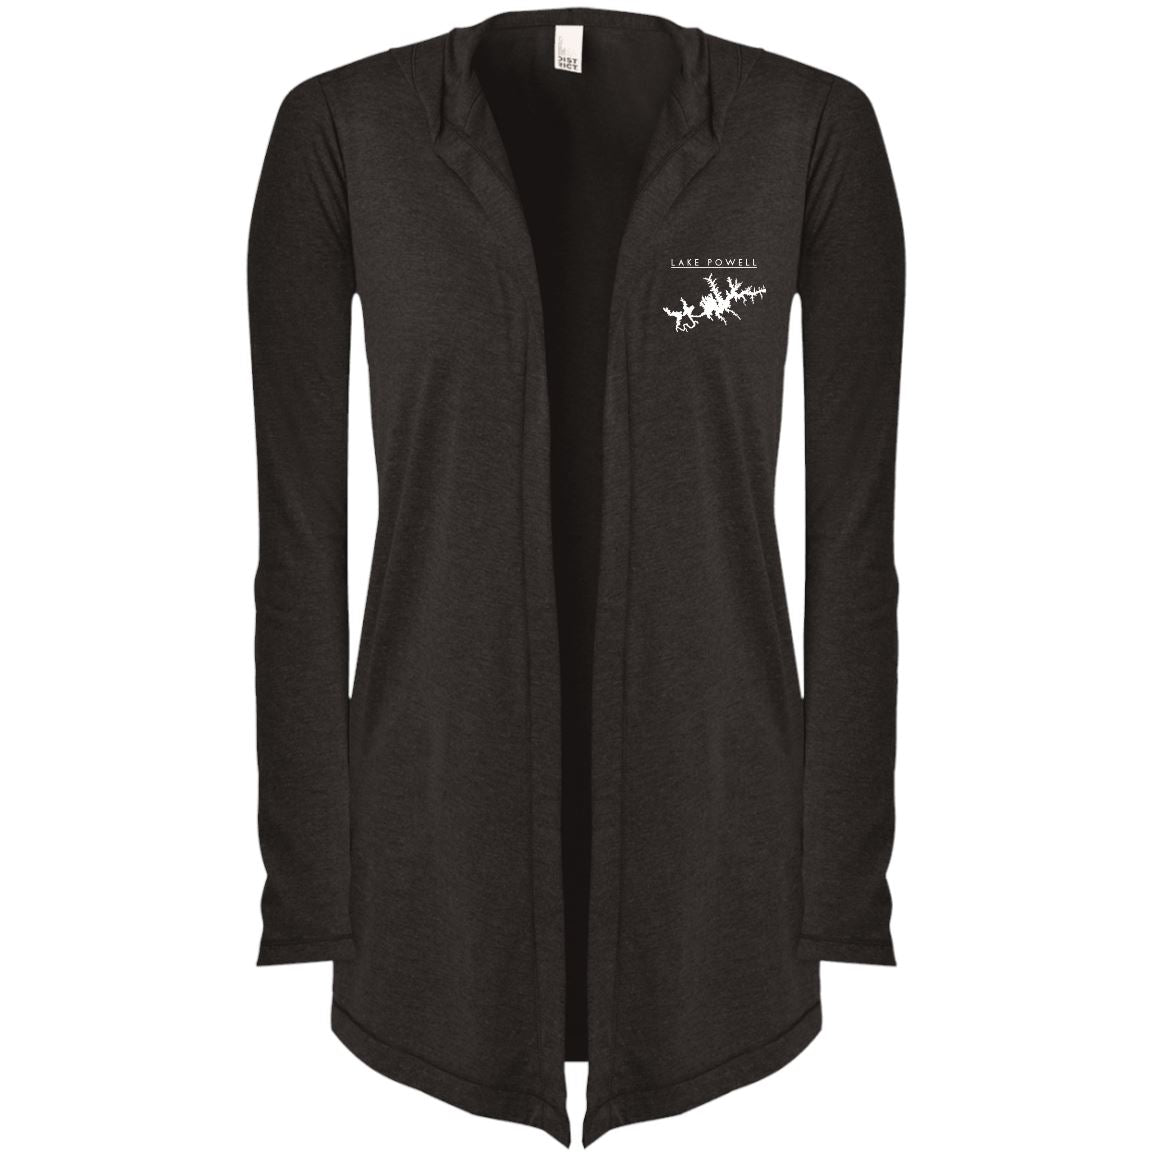 Lake Powell Embroidered Women's Hooded Cardigan - Houseboat Kings